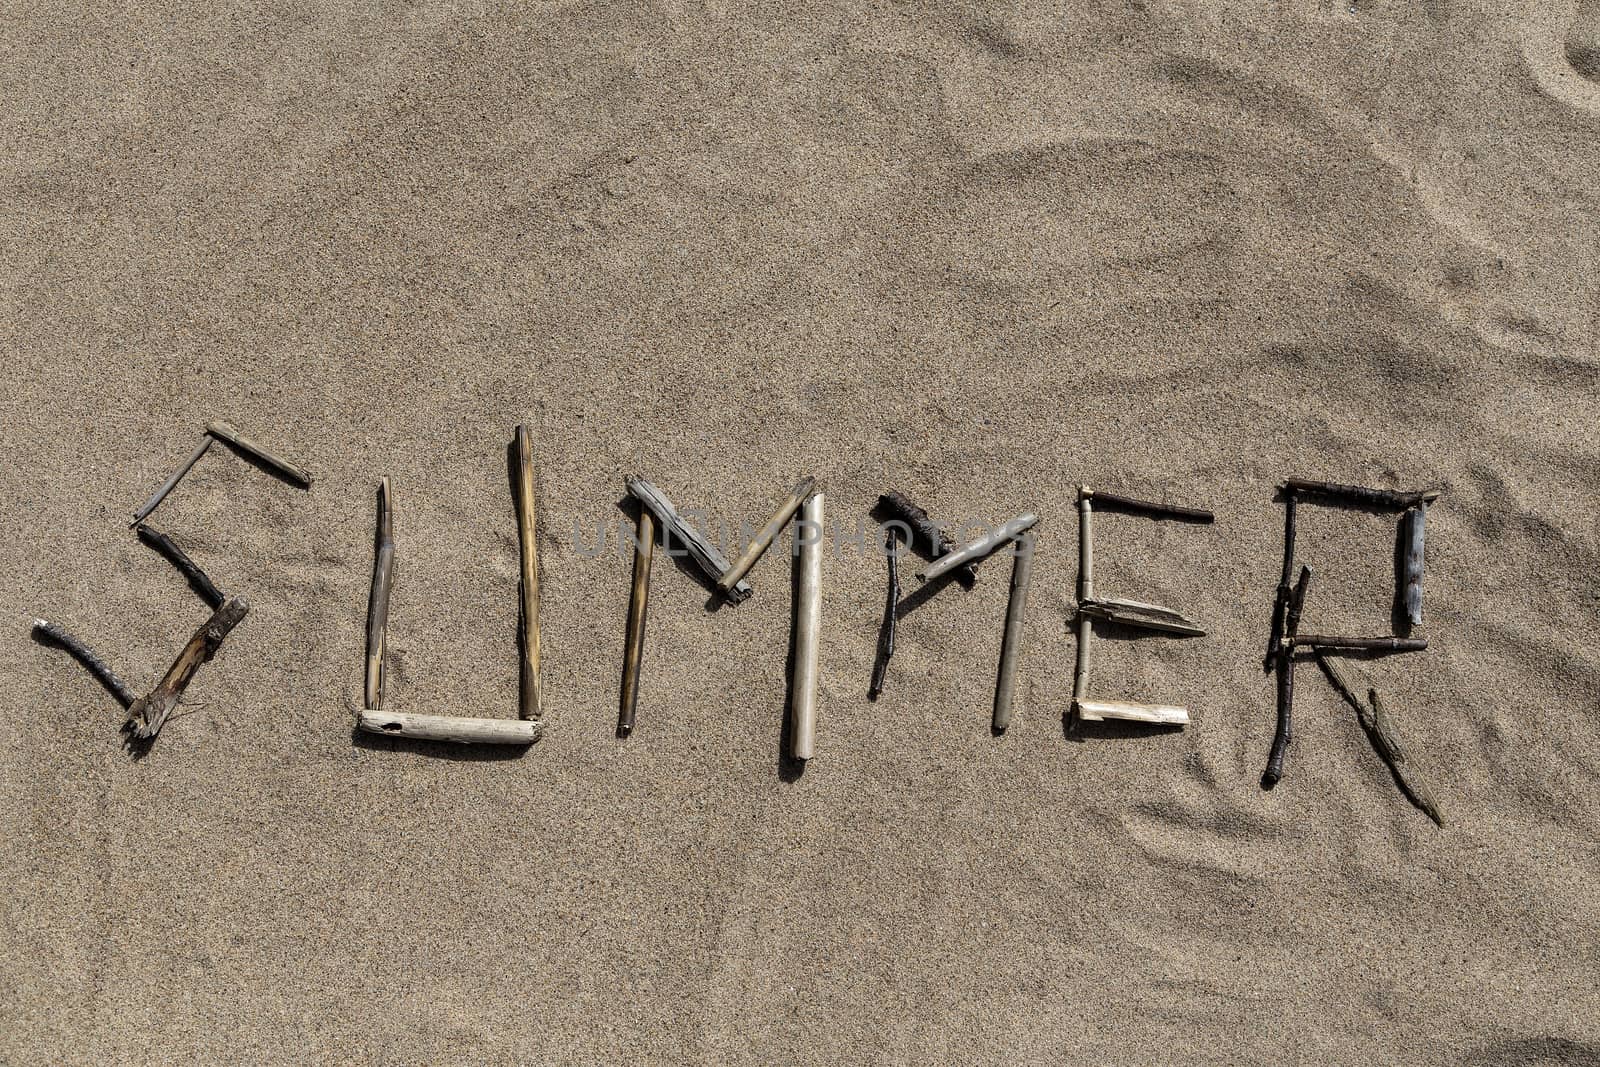 A set of sticks in a sandy beach forming the word Summer